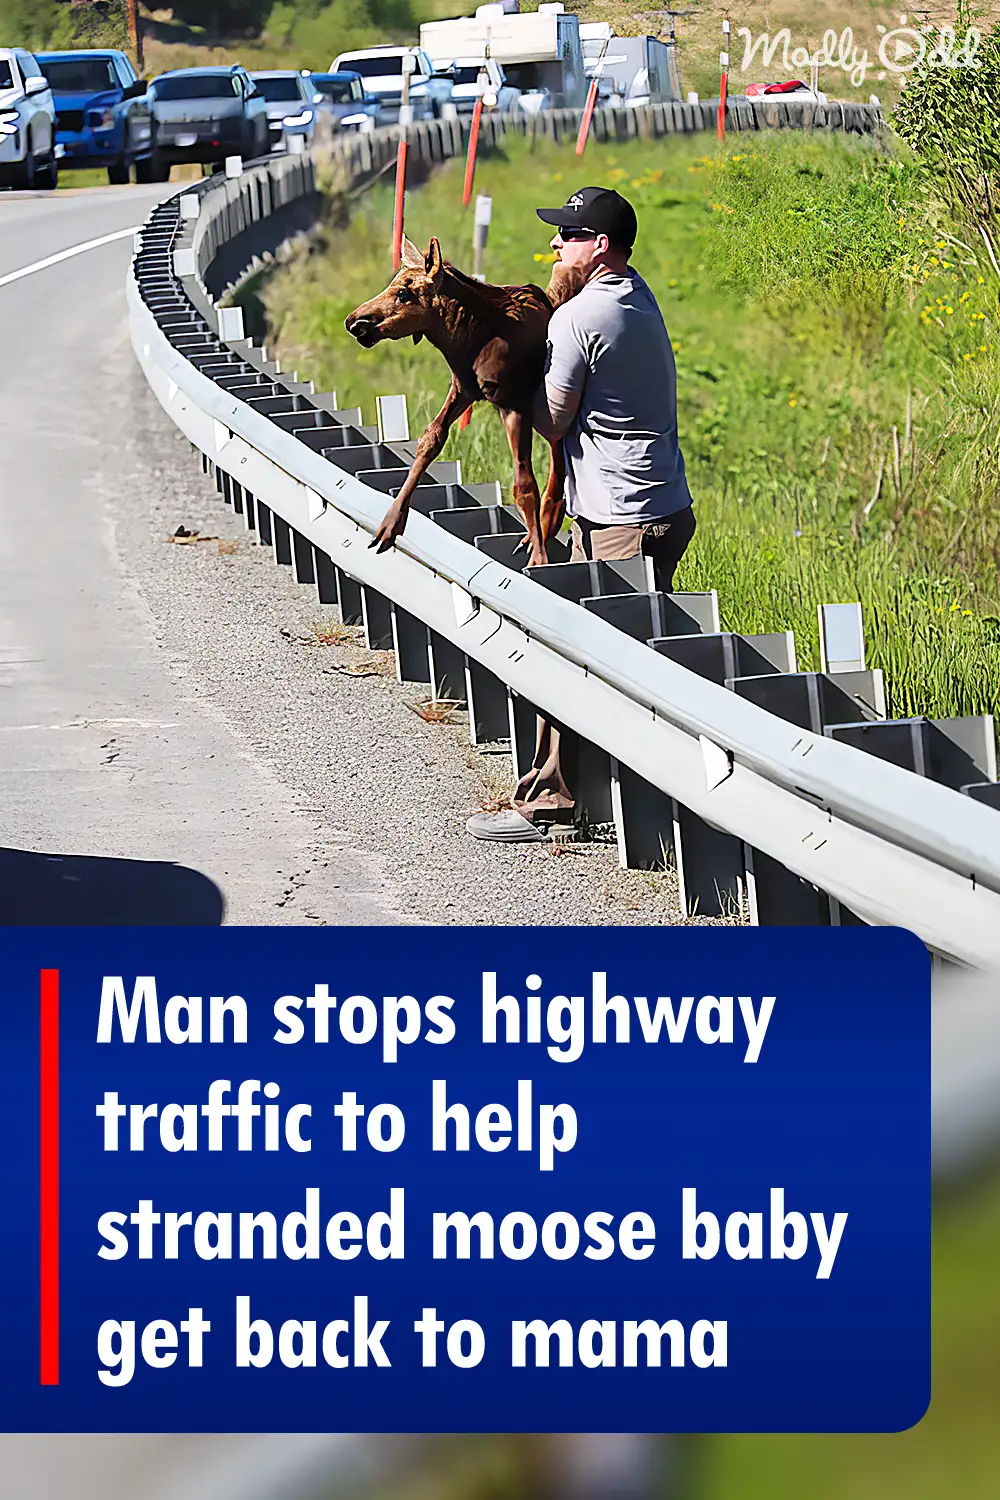 Man stops highway traffic to help stranded moose baby get back to mama